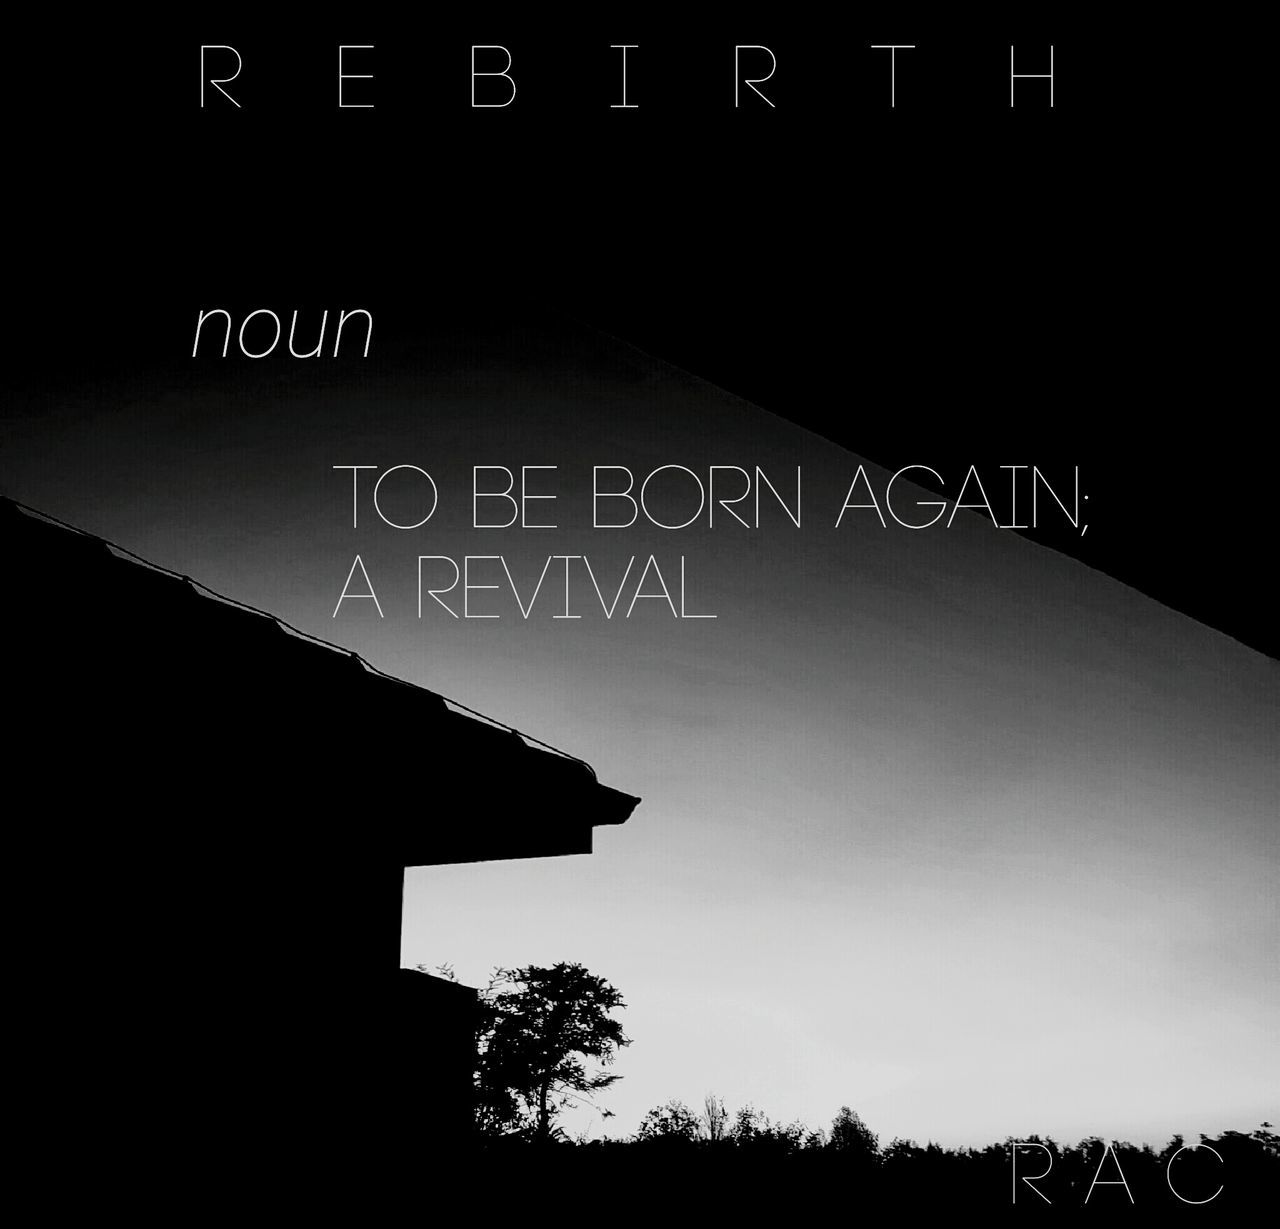 To be born again